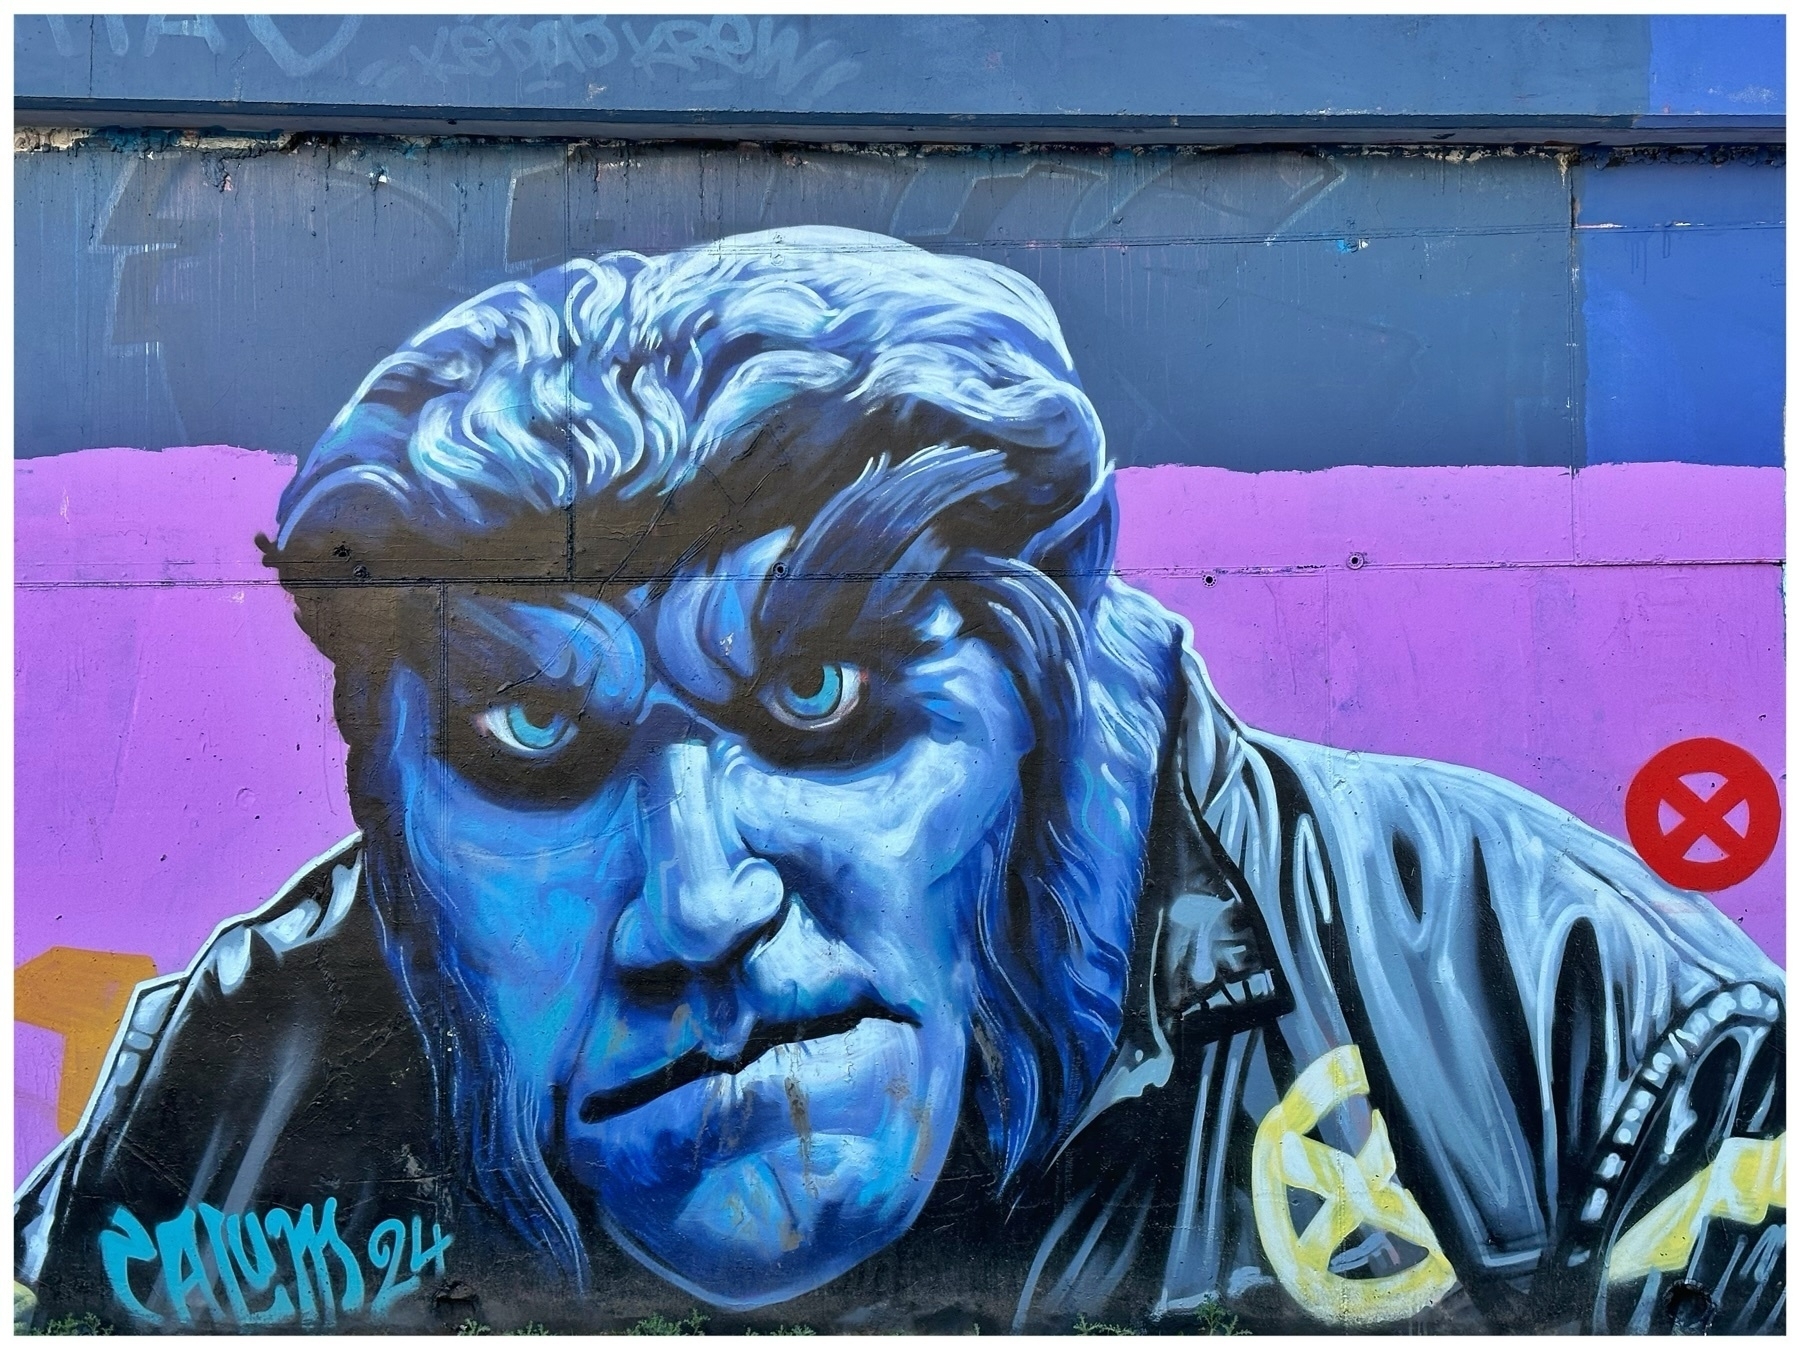 Graffiti art of a person with intense gaze, depicted in shades of blue on a wall with pink and blue sections. There's a no-entry sign symbol in red on the right. Artist's signature "CALUM 94" at the bottom